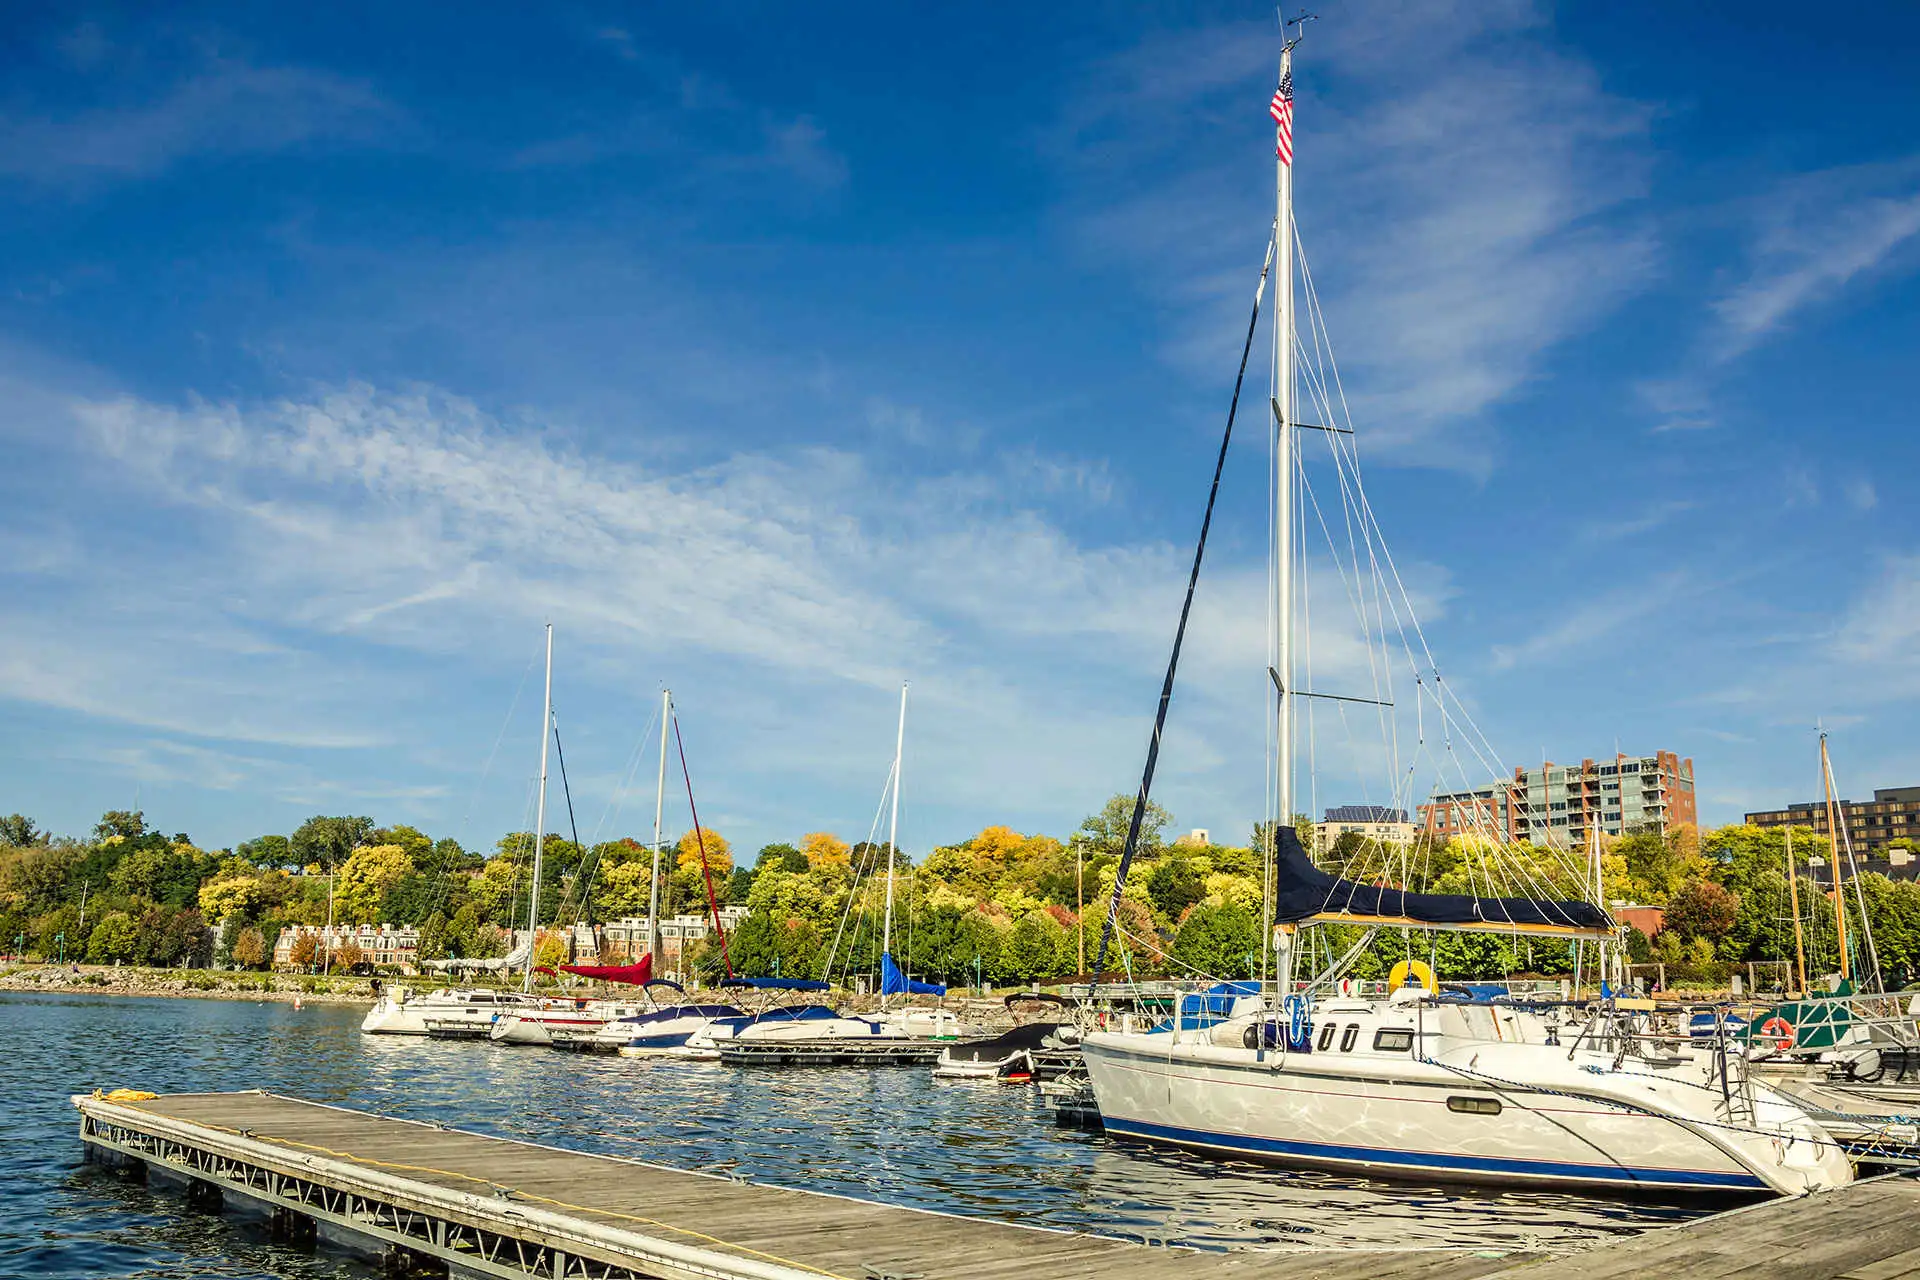 boats on a dock in Lake Champlain, Vermont; Courtesy of Albert Pego/Shutterstock.com